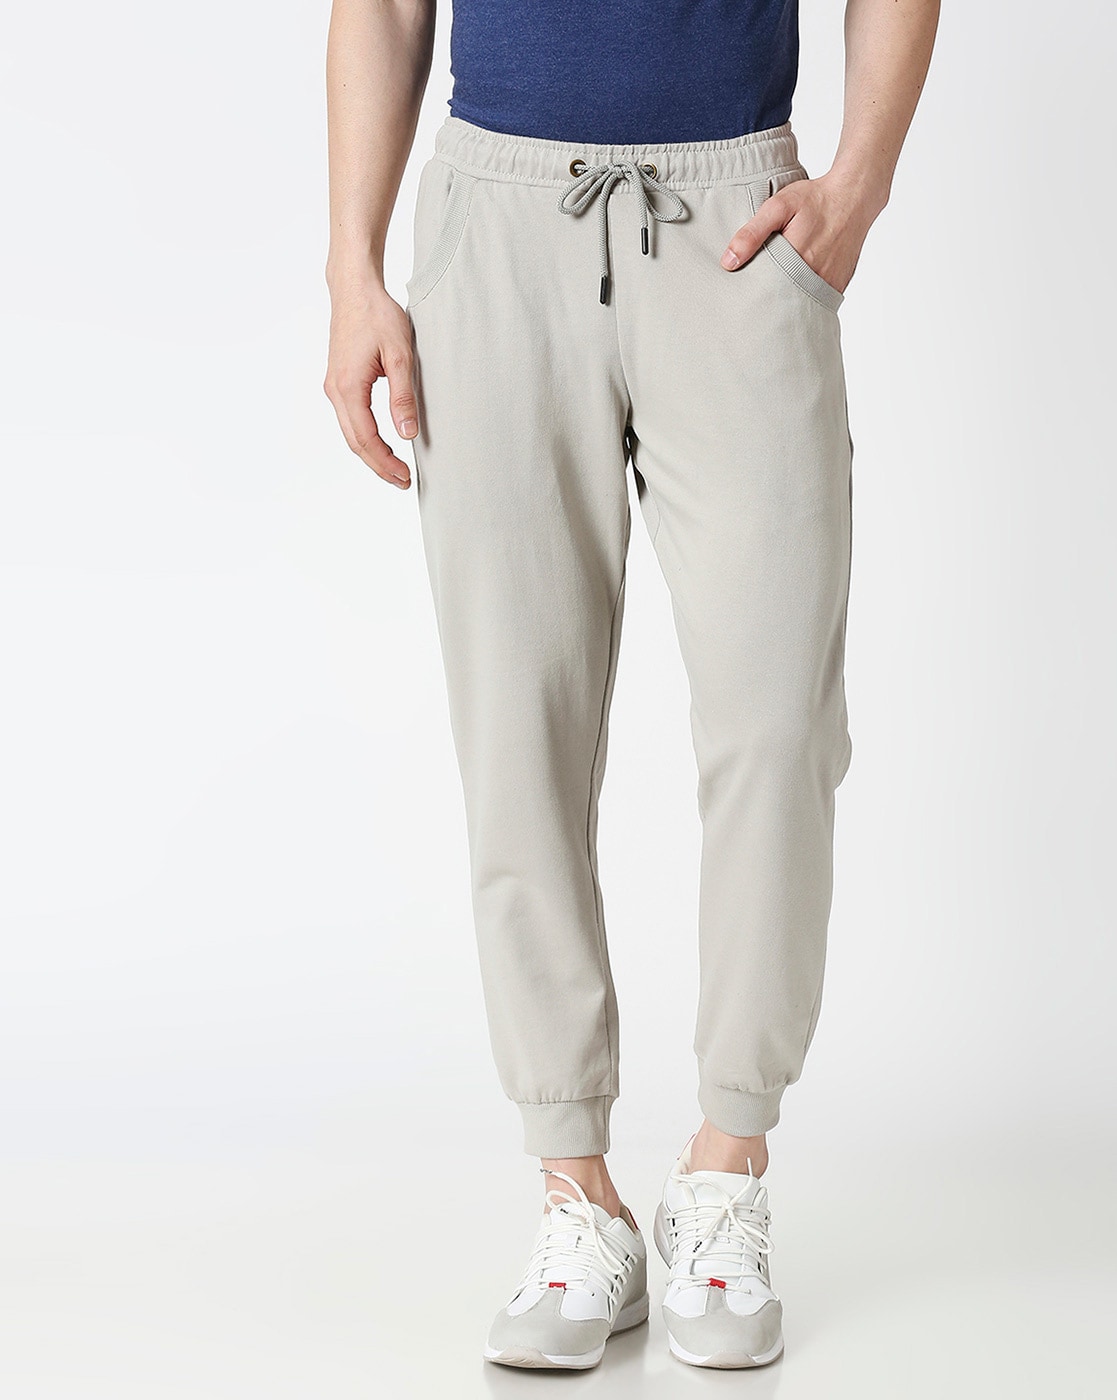 Cotton Joggers with Insert Pockets